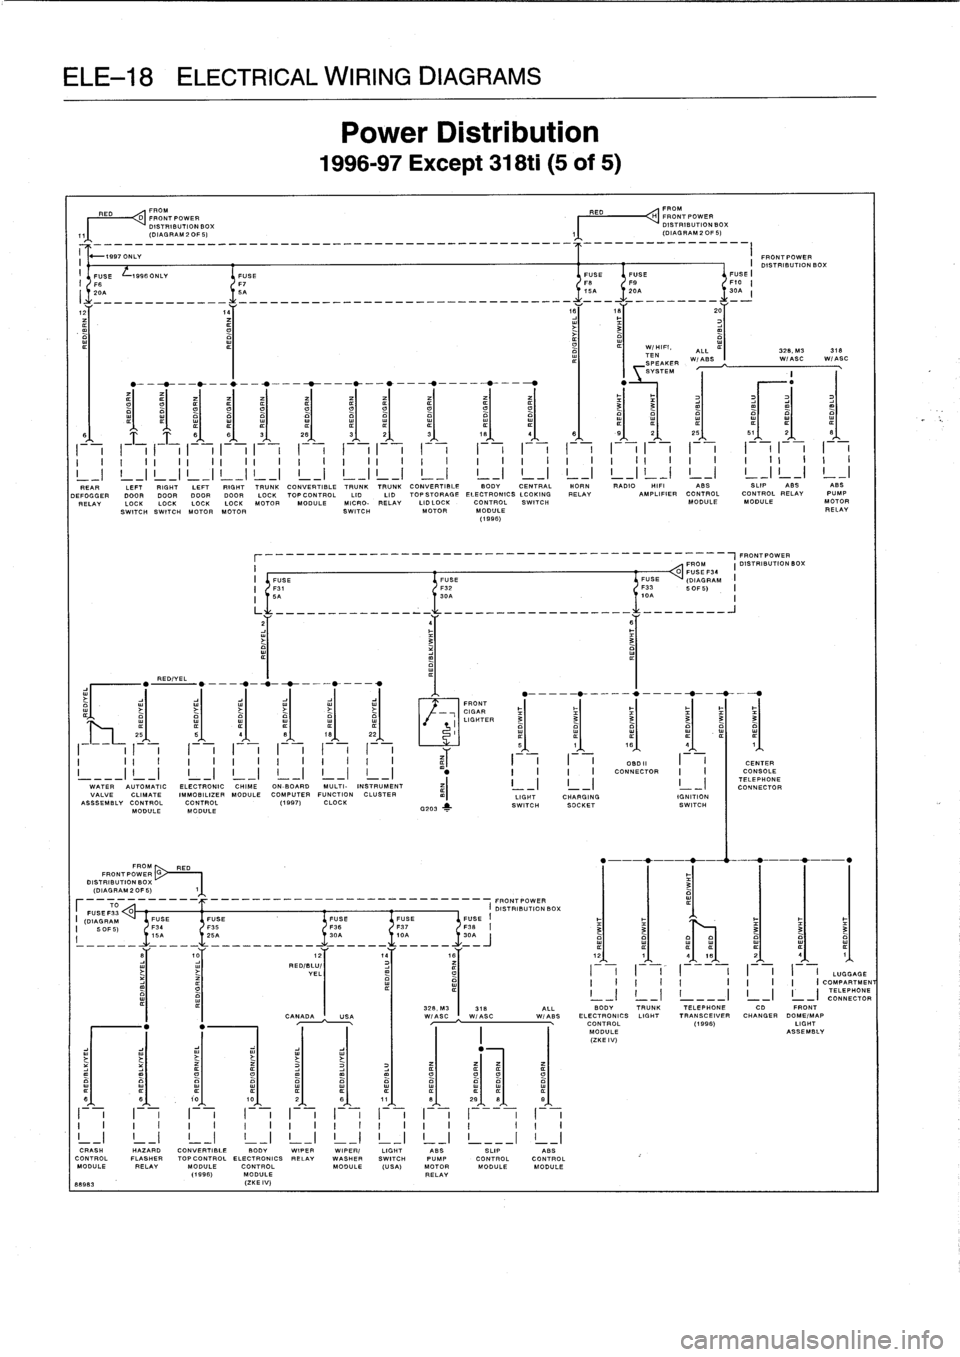 BMW M3 1994 E36 Workshop Manual 
ELE-18
ELECTRICAL
WIRING
DIAGRAMS
RED
FROM

	

RED

	

FROM
D
FRONT
POWER

	

~H
FRONTPOWER
DISTRIBUTION
BOX

	

DISTRIBUTION
BOX
(DIAGRAM2OF5)

	

jl
(DIAGRAM2OF5)

-

--

I
.Sl

-

O

-

NLY
------